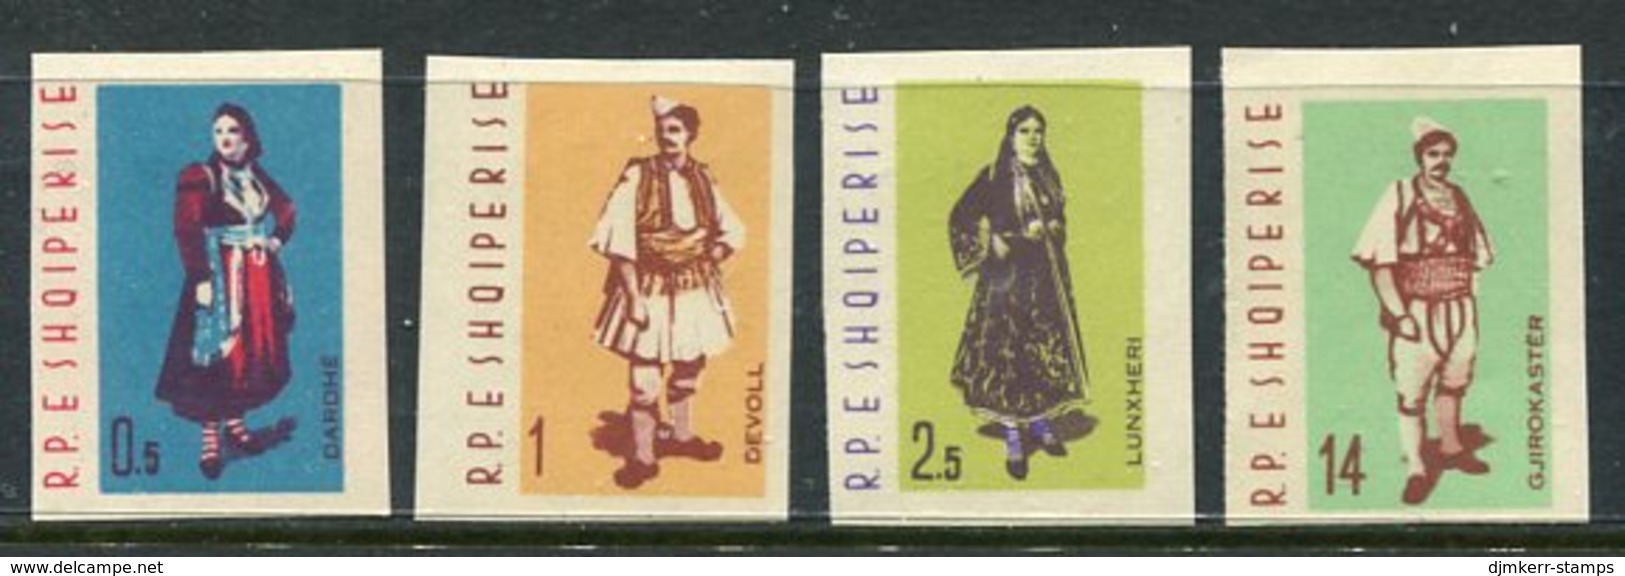 ALBANIA 1962 Traditional Costumes Imperforate Set LHM / *.  Michel 695-98B - Albania